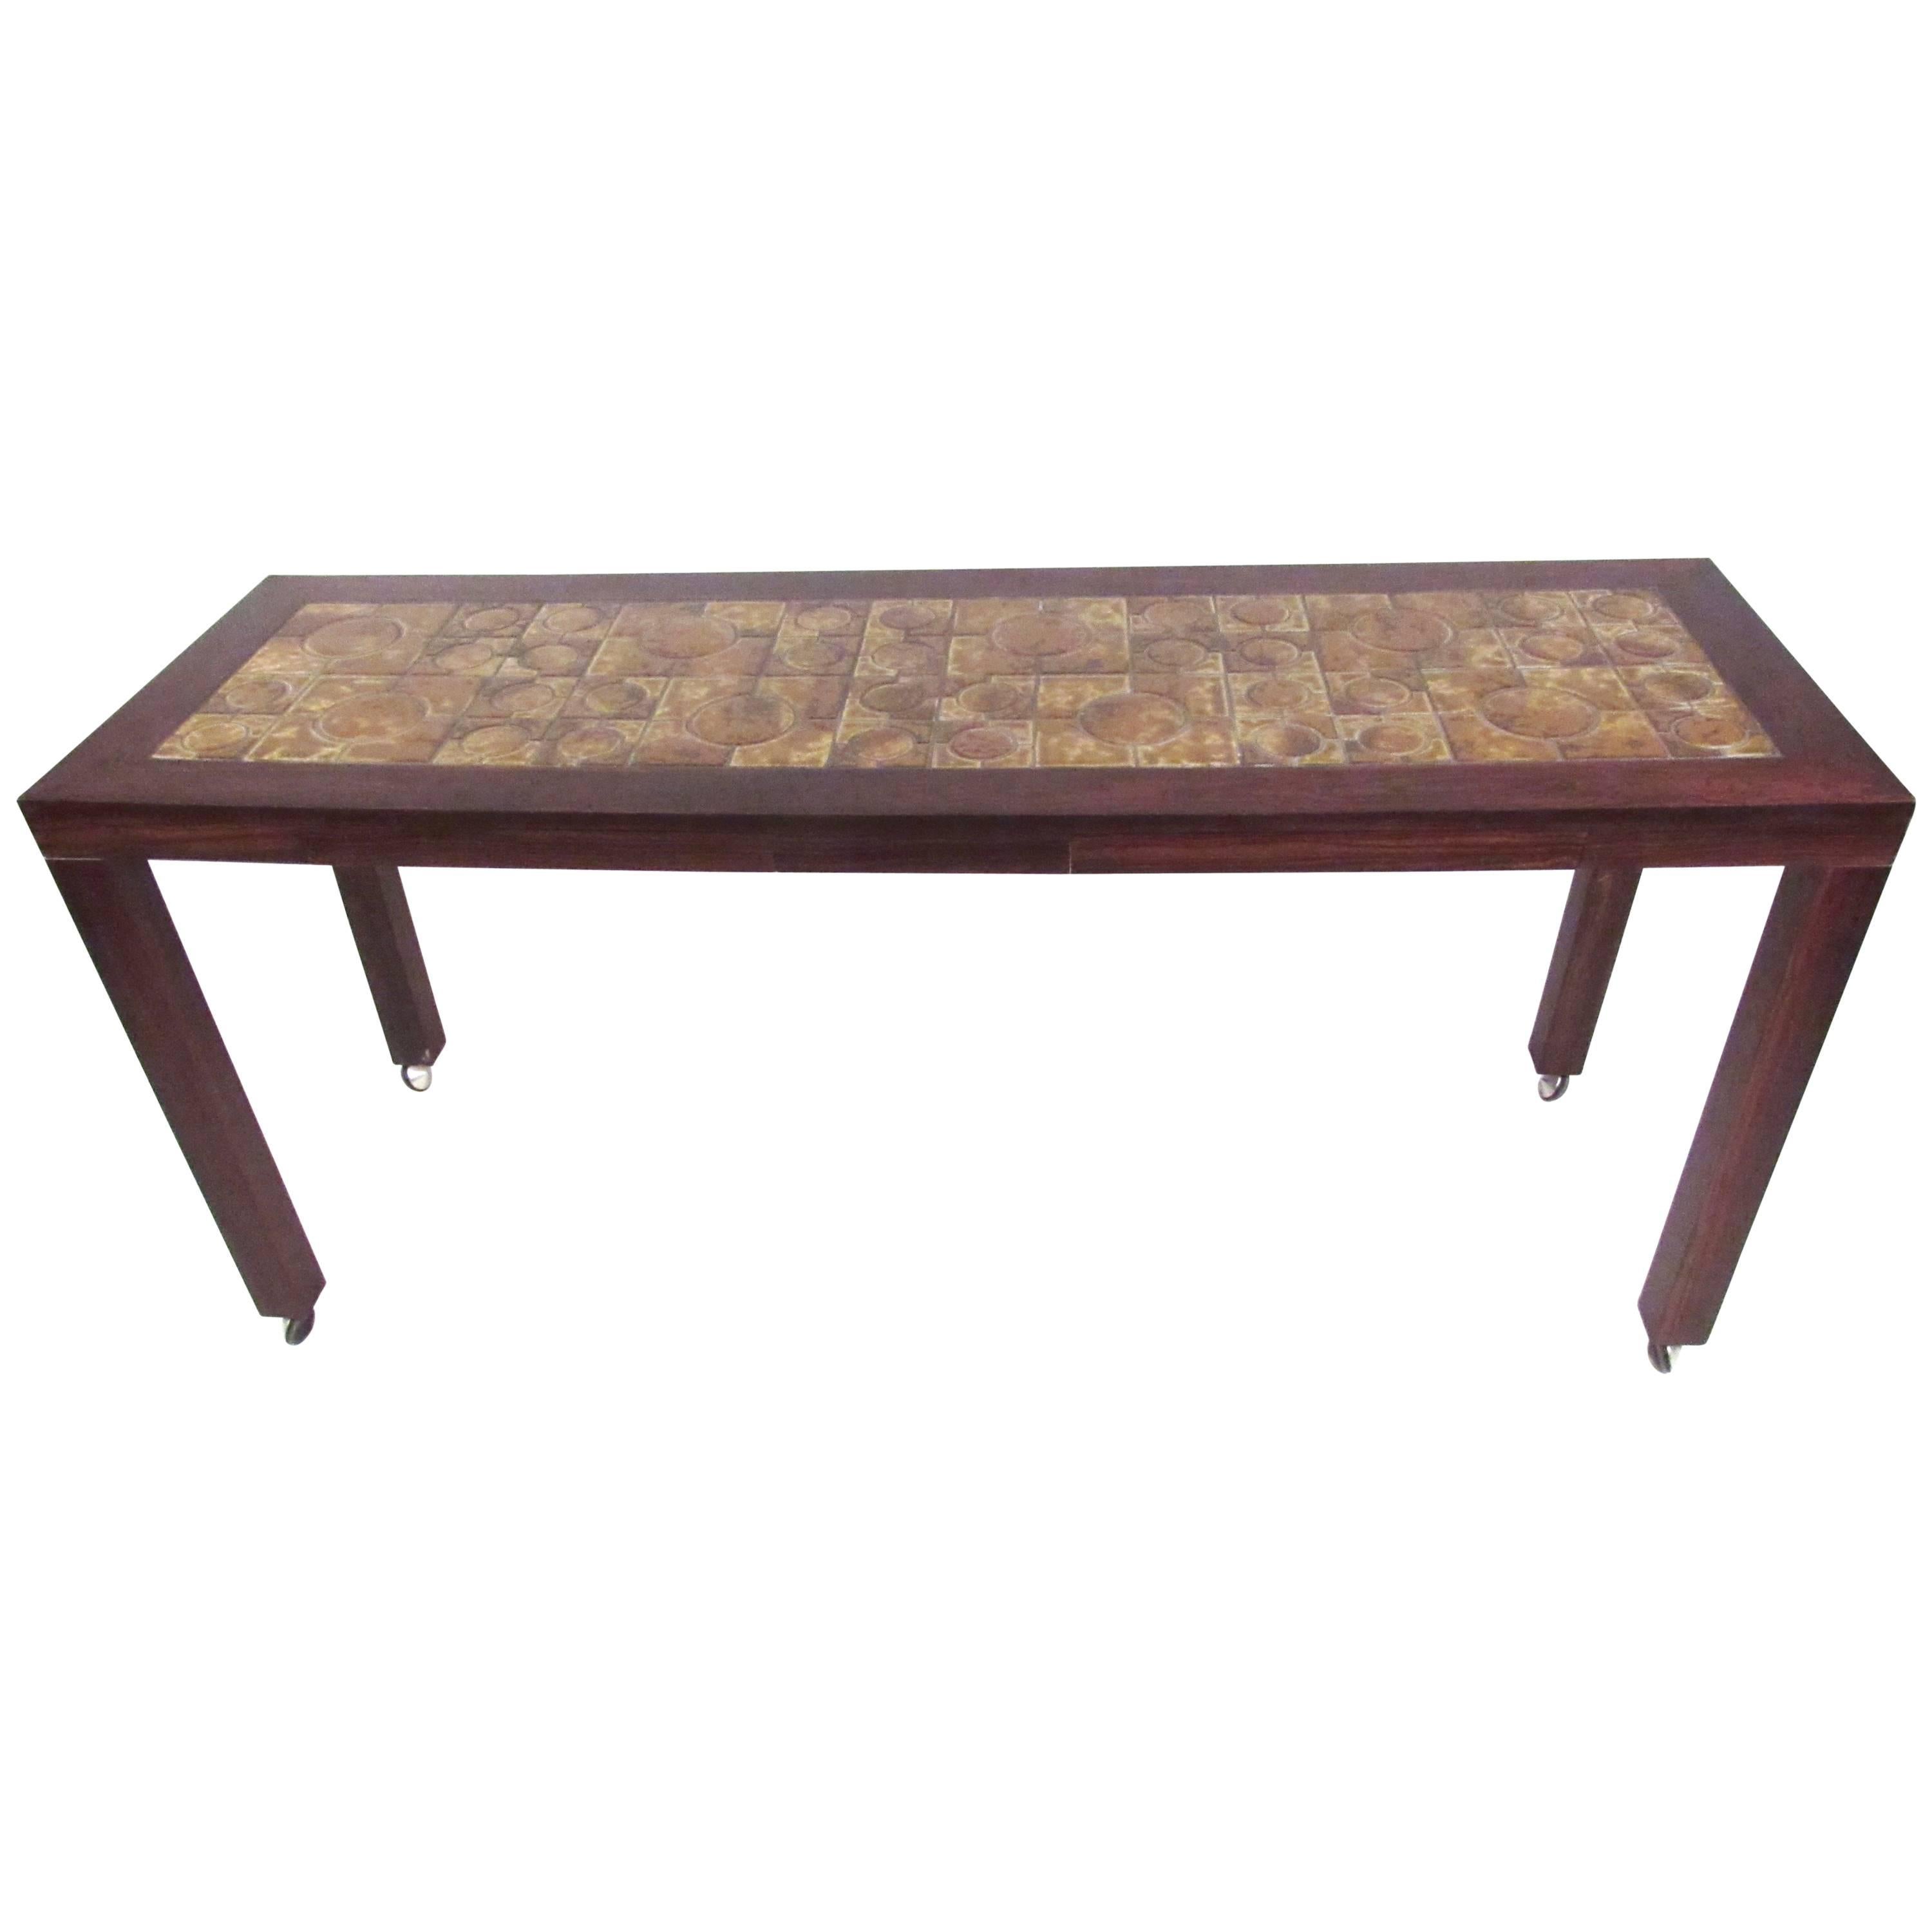 Danish Modern Rosewood Console Table with Tile, Inlay